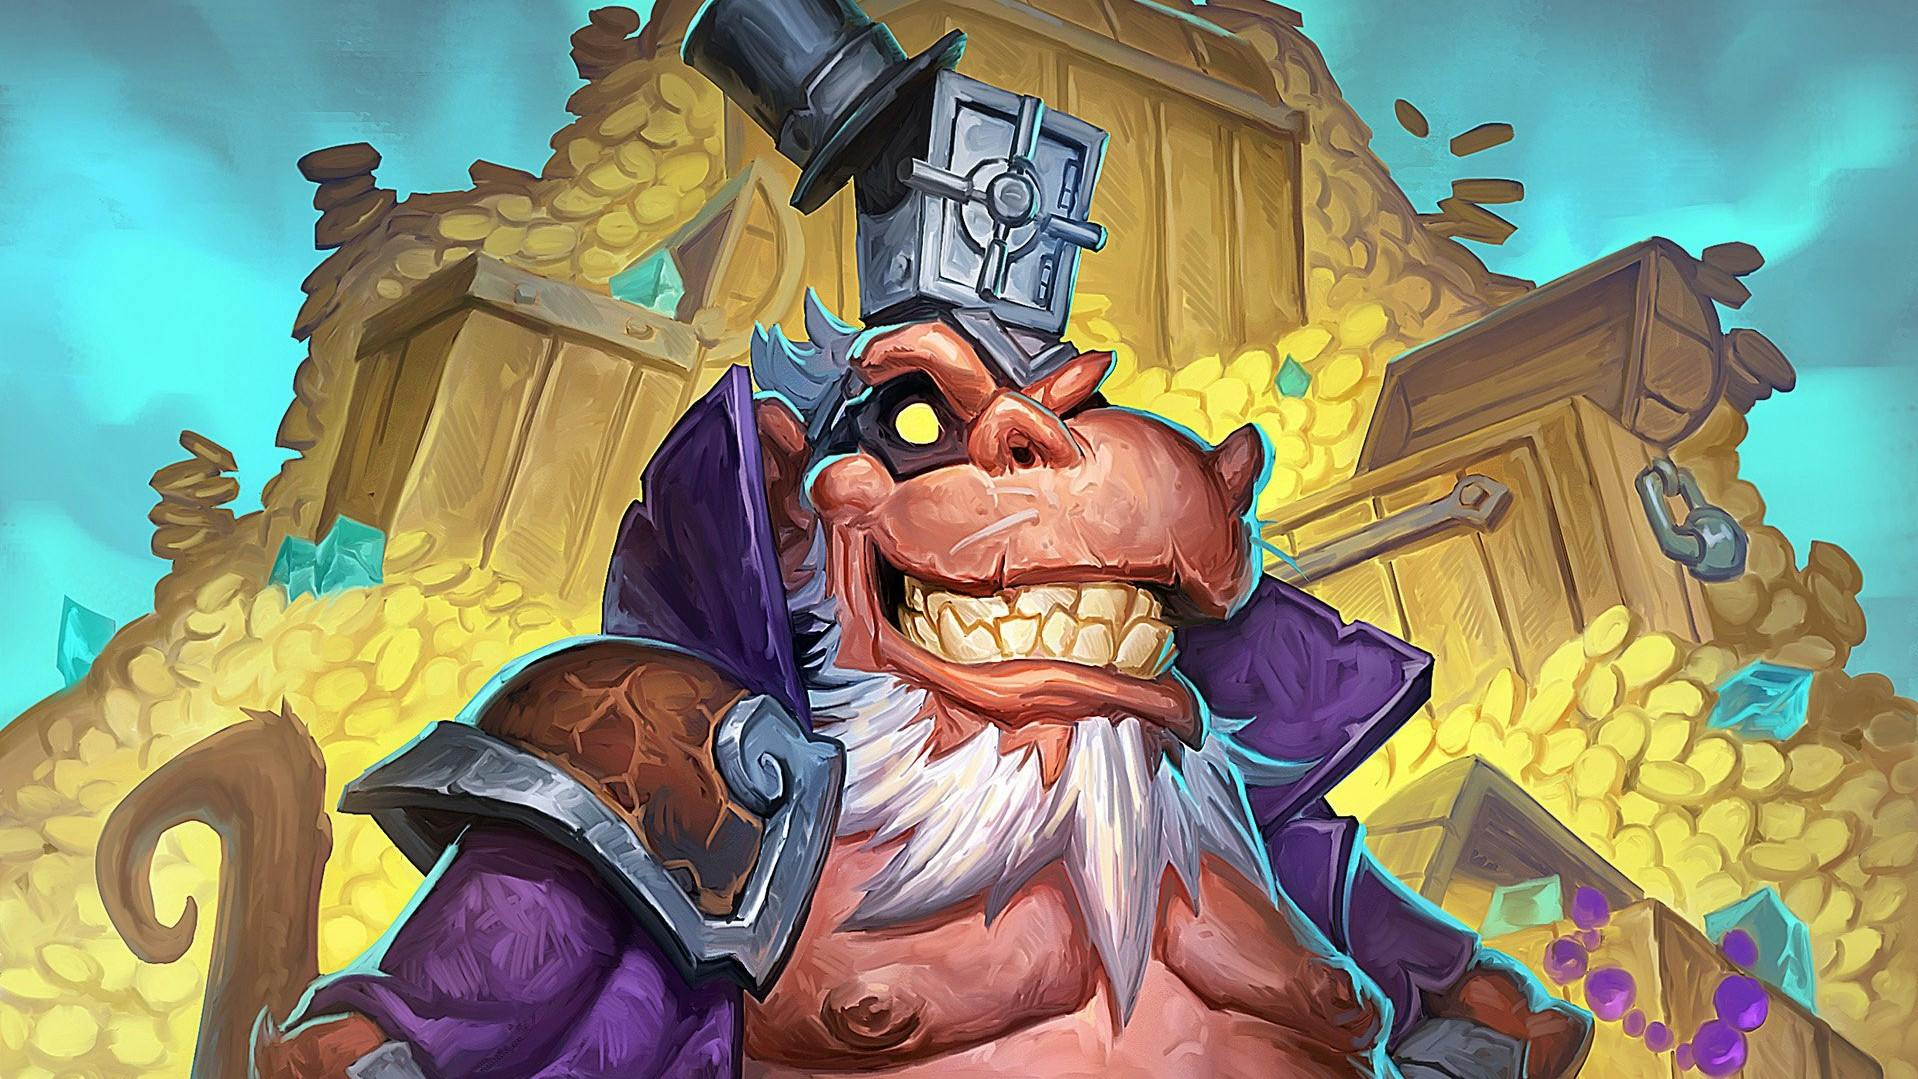 Hearthstone community in uproar over introduction of pay-to-win Battlegrounds perks